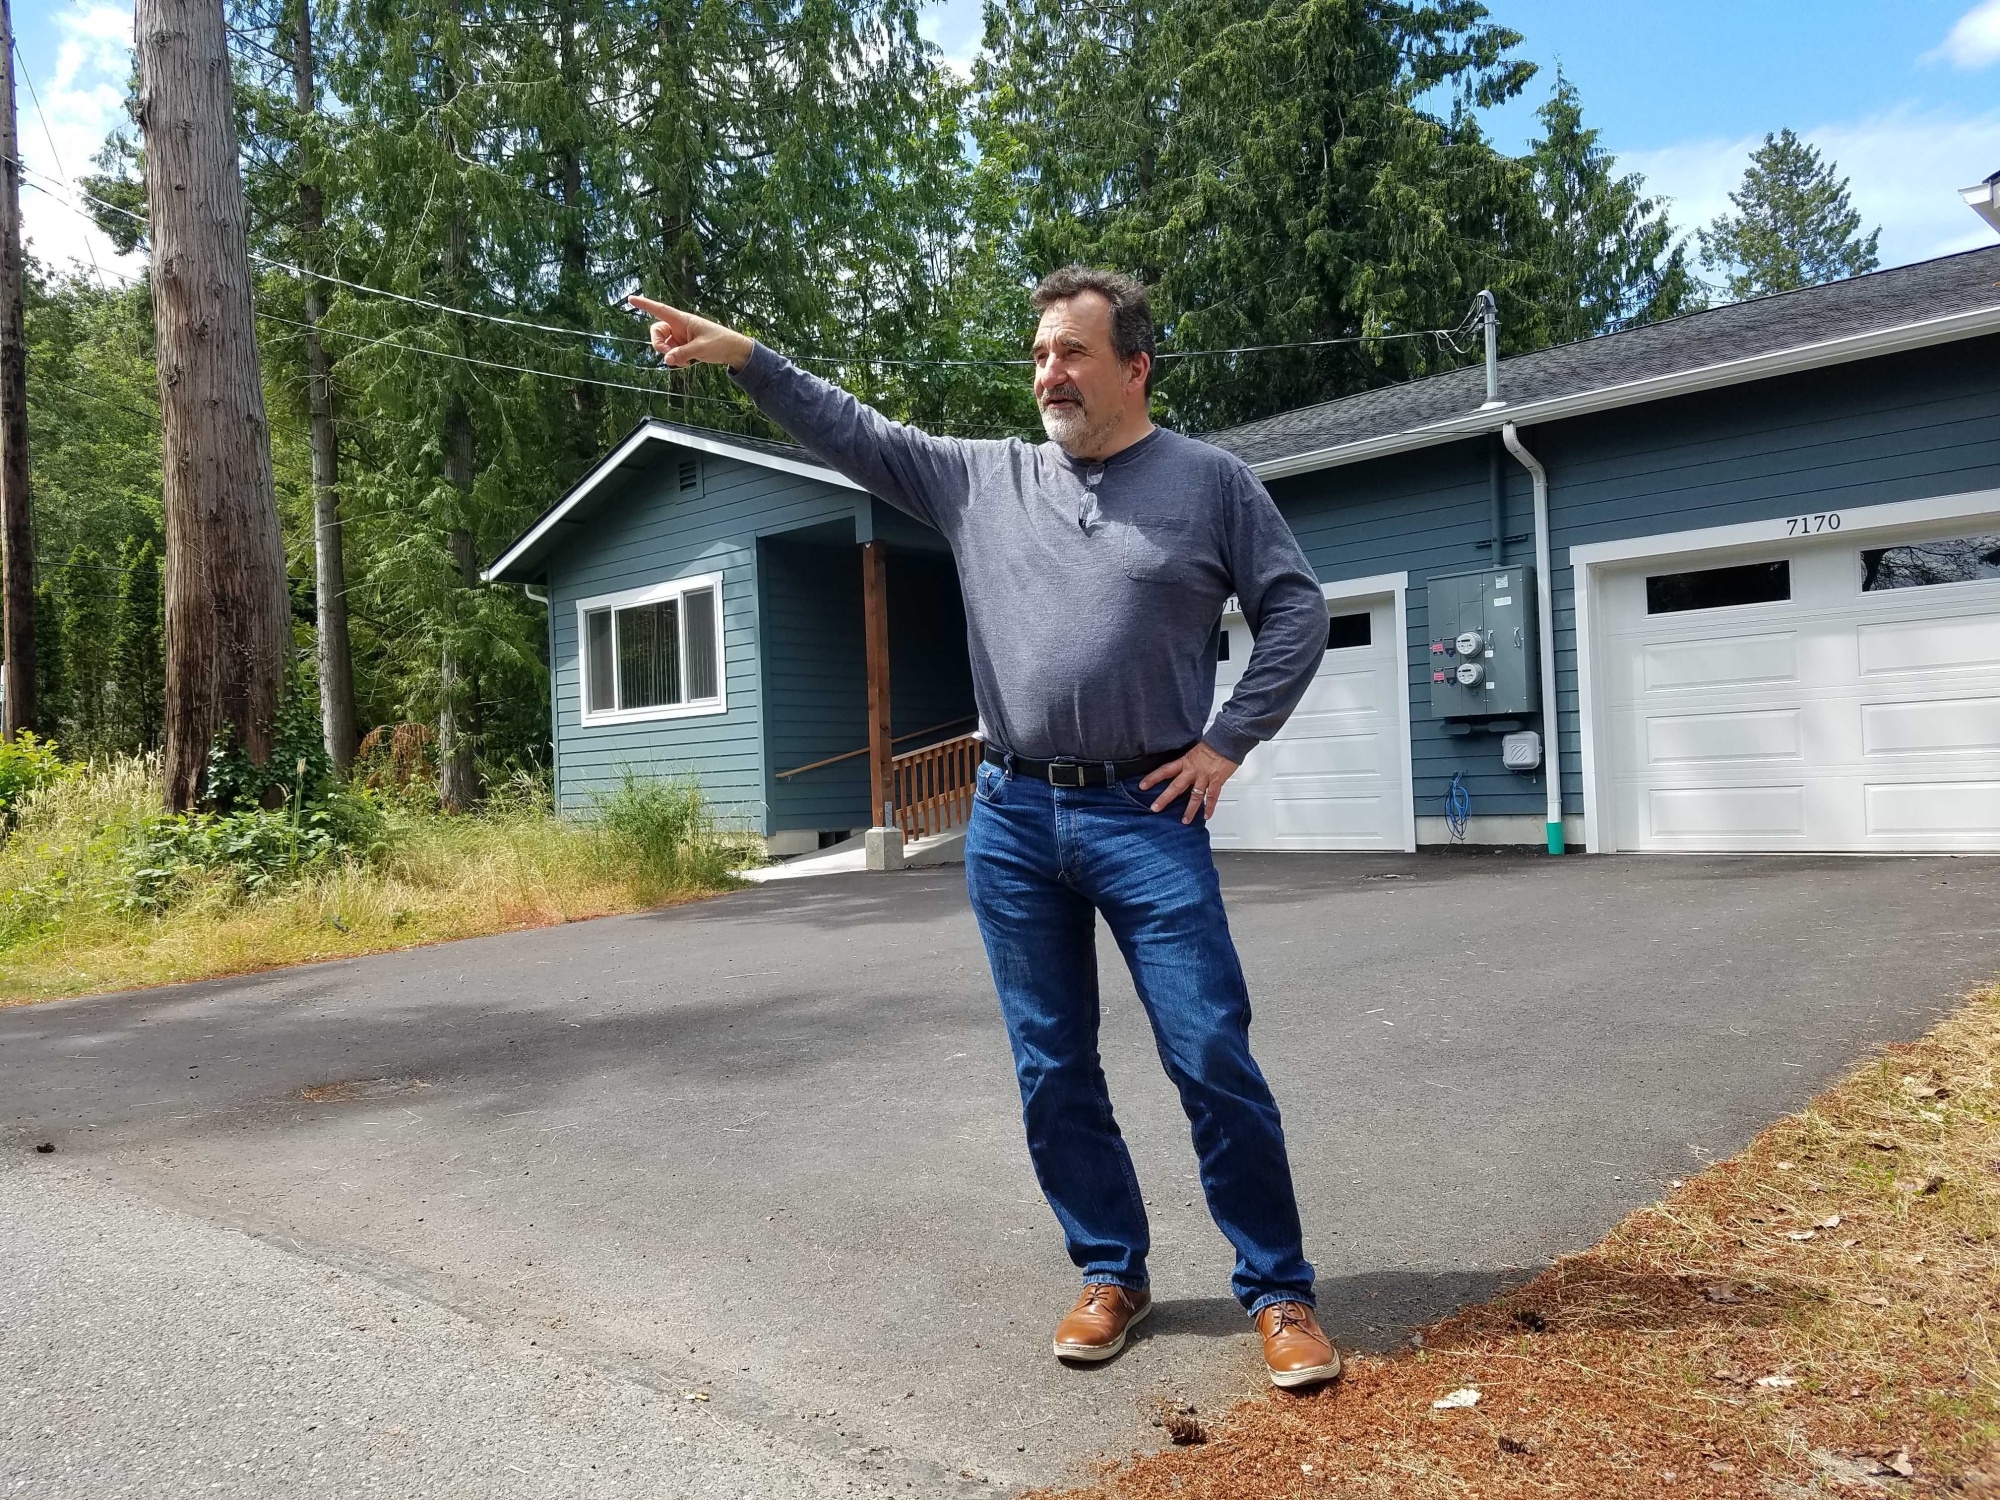 Leonard Forsman,&nbsp;chairperson&nbsp;of Suquamish tribal government, outside an affordable home on the&nbsp;tribe’s&nbsp;reservation near Seattle. Suquamish is using federal pandemic aid to create affordable housing.